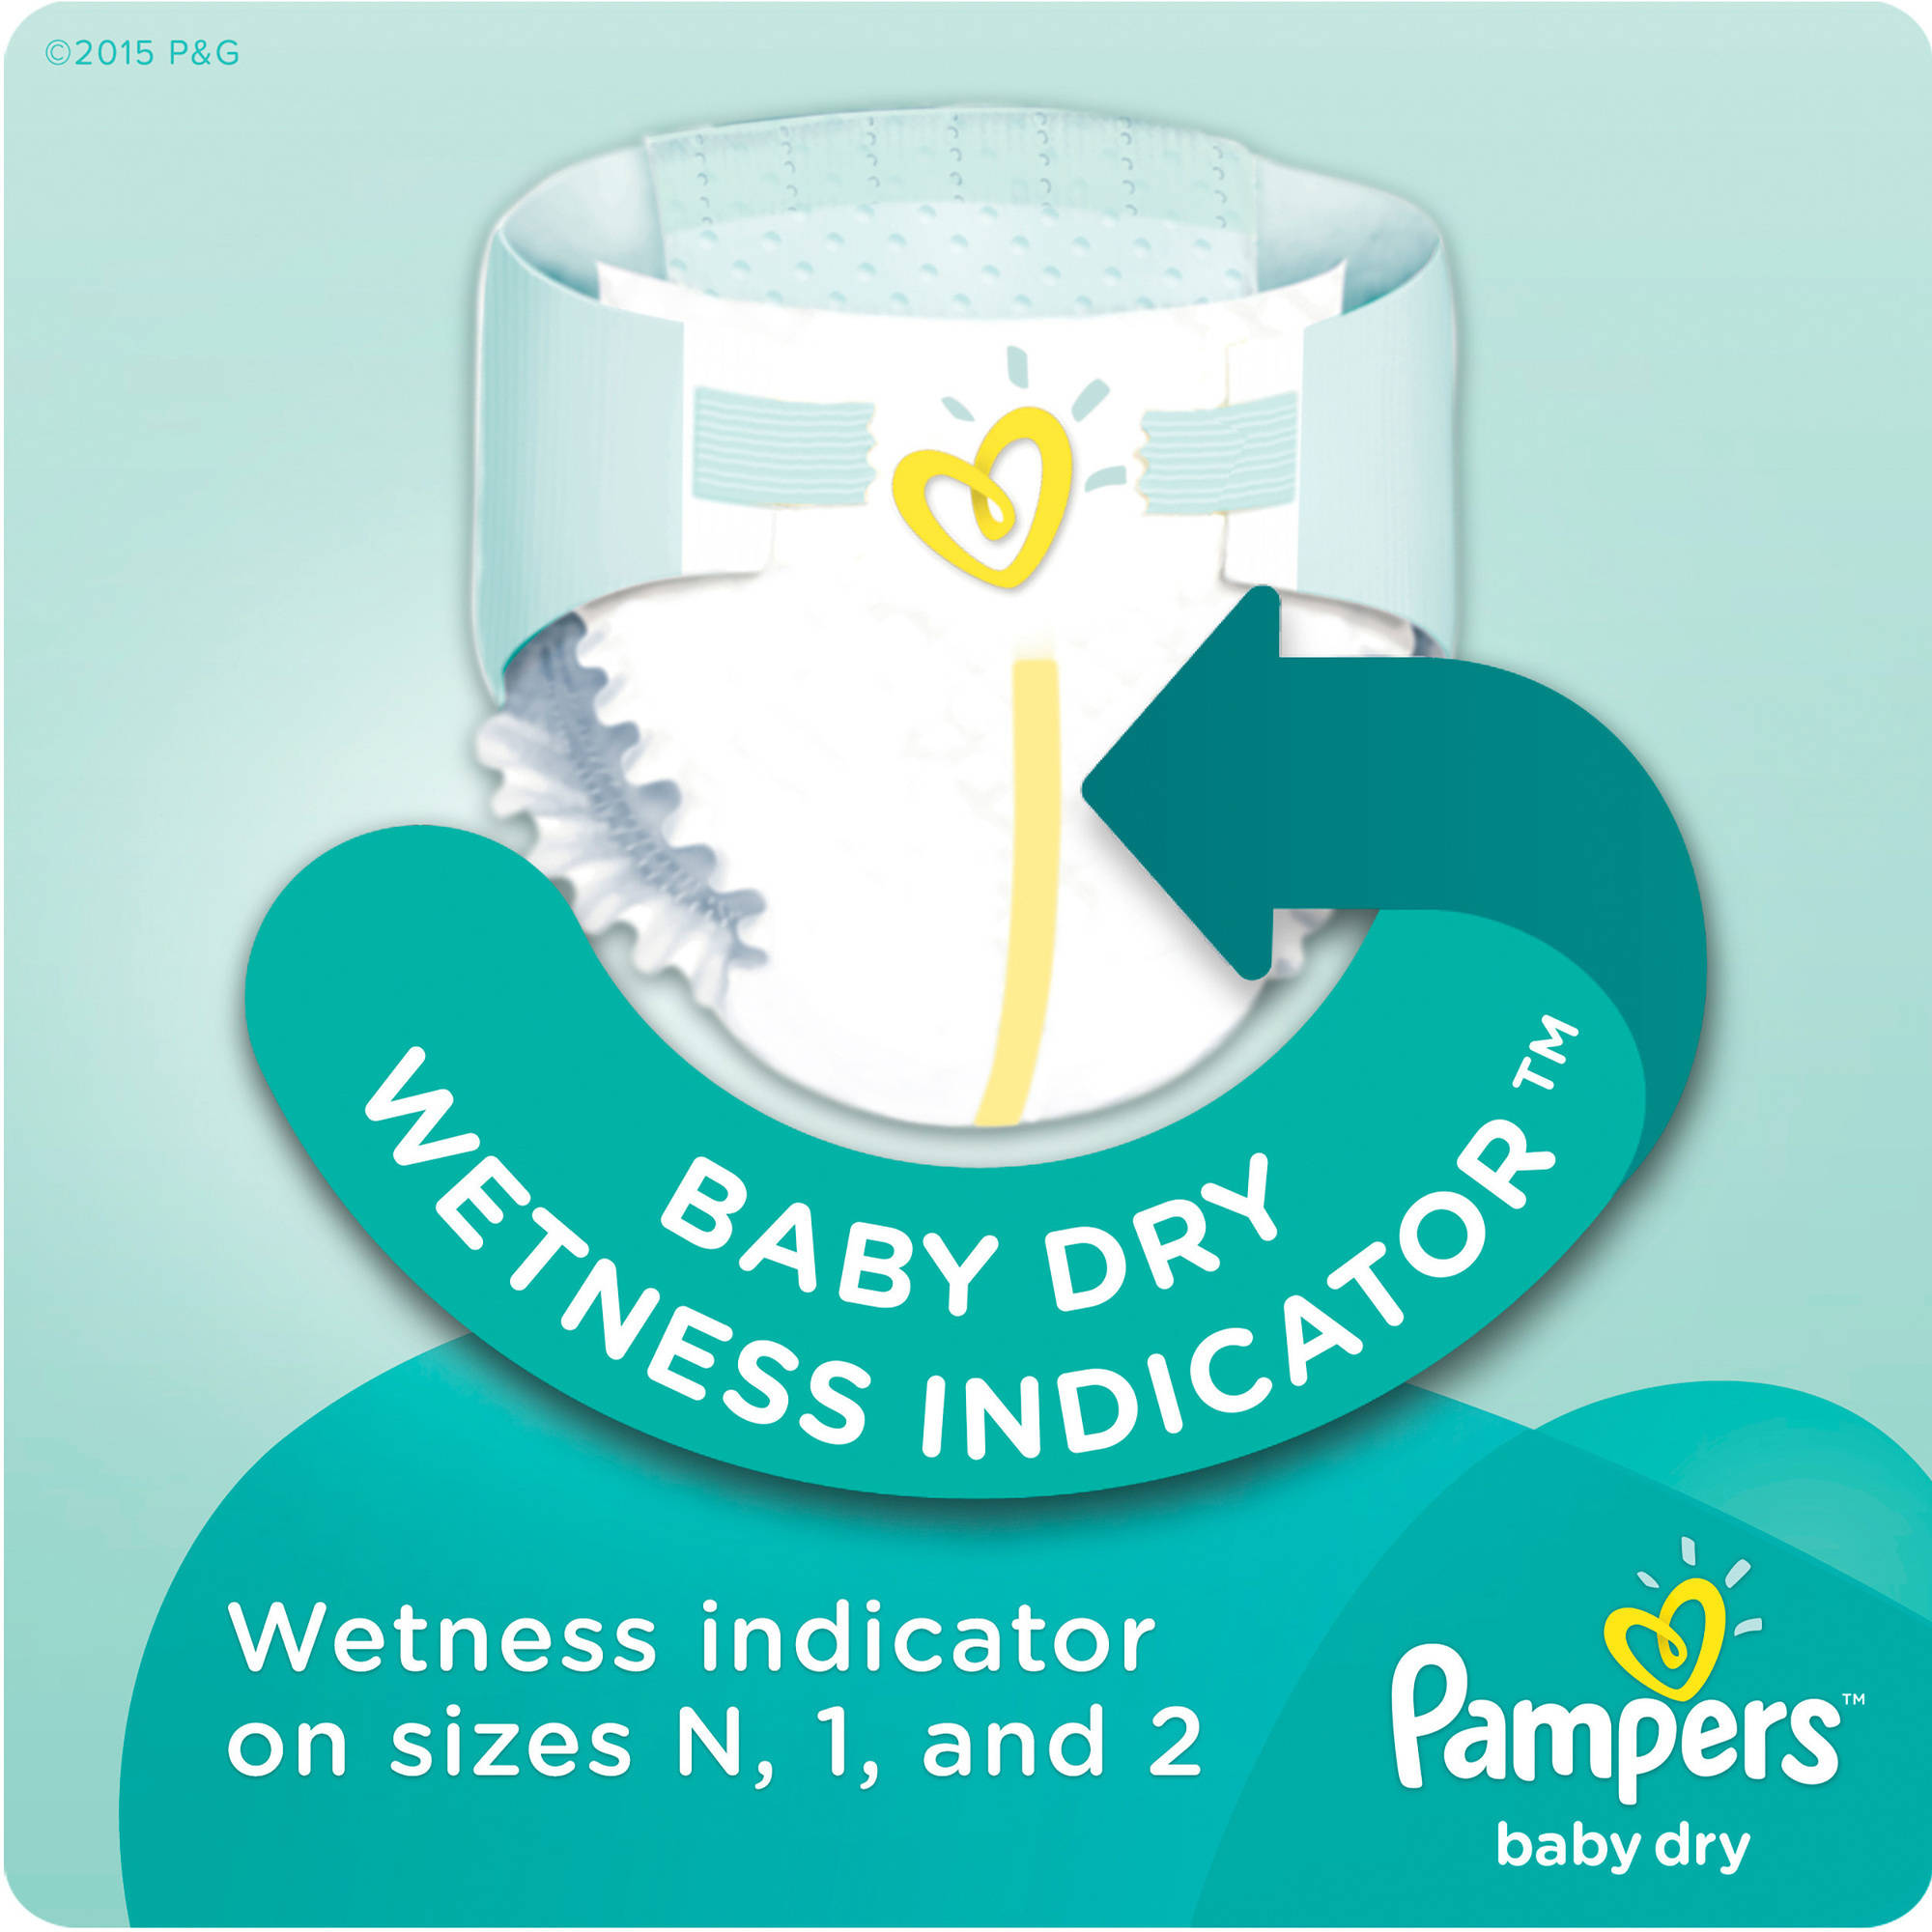 Pampers Baby Dry Diapers, Huge Pack, Size 1, 198 Diapers - image 5 of 8